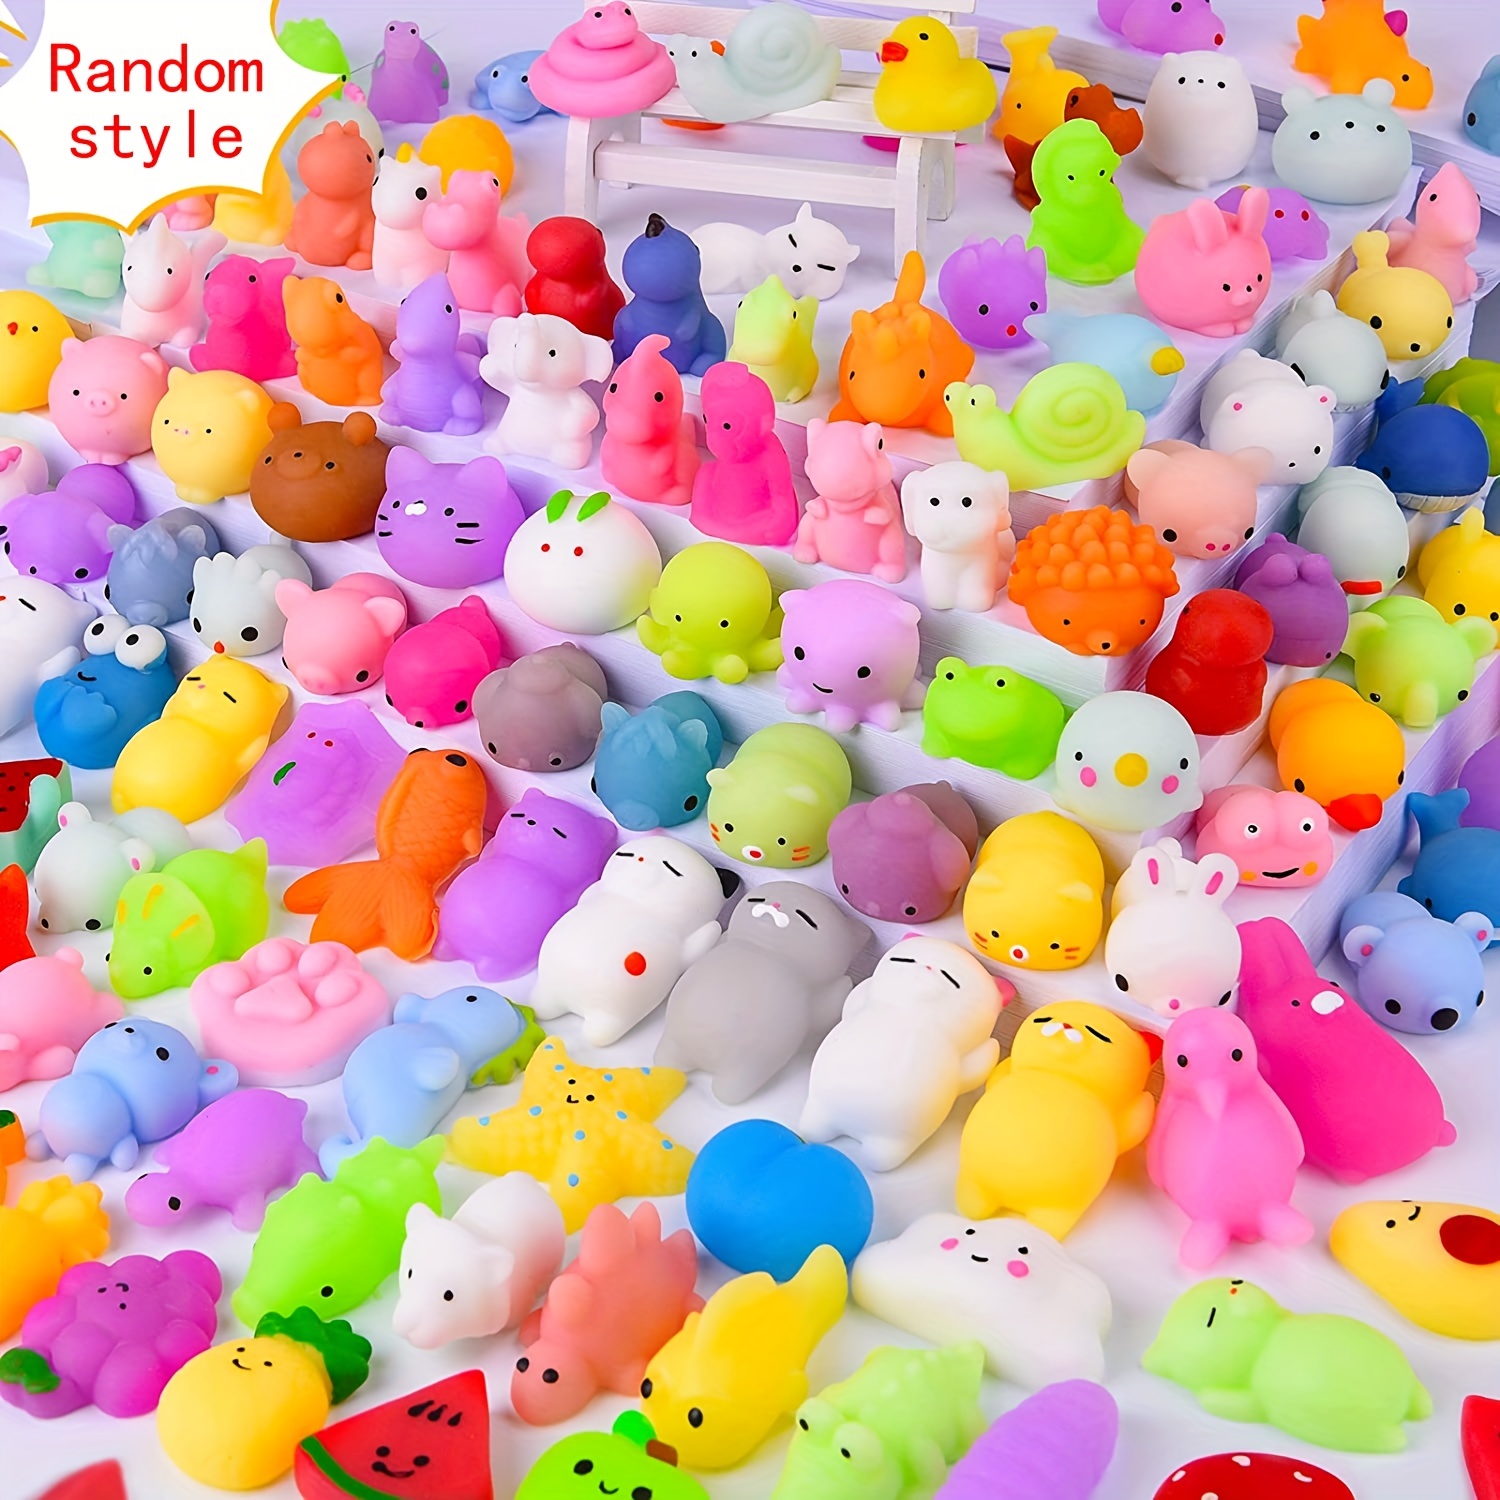 Thremhoo 40 Pcs Sticky Hands for Kids Goodie Bag Stuffer Stretchy Treasure Box Toy Classroom Prize Student Mini Toys Bulk Pinata Fillers